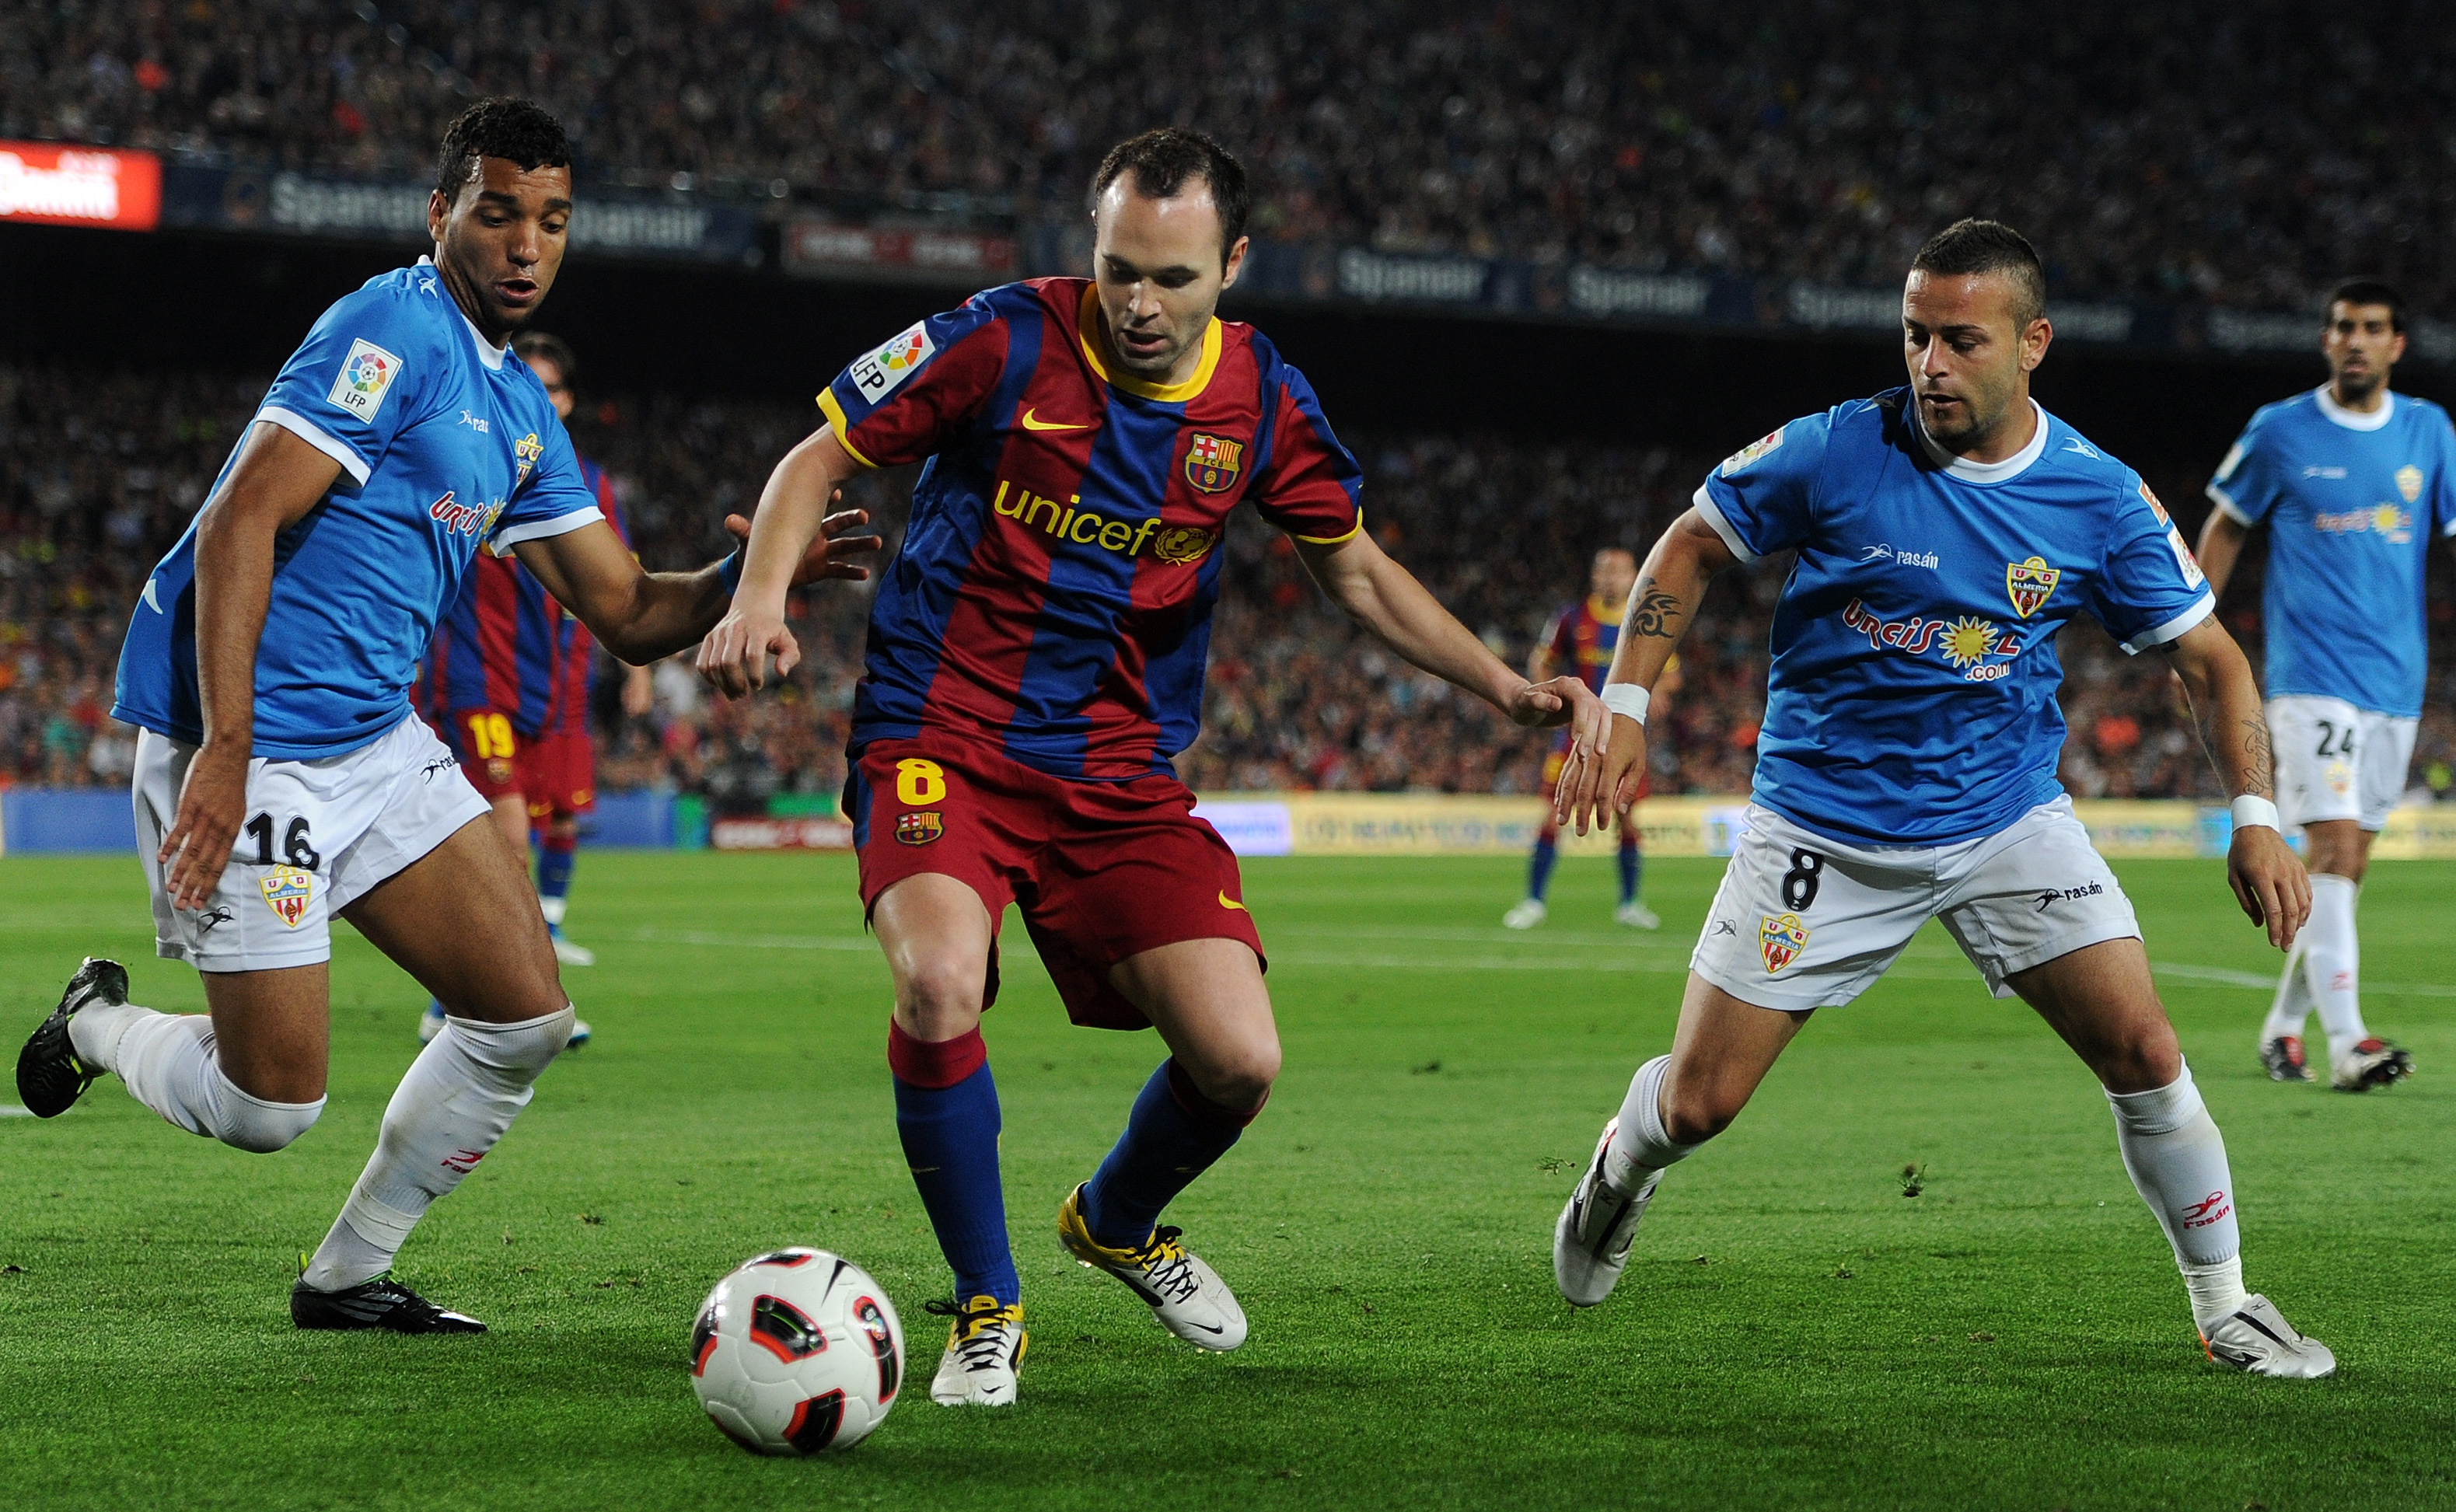 BARCELONA, SPAIN - APRIL 09:  Andres Iniesta (C) of Barcelona duels for the ball with Michel Macedo (L) and Albert Crusat Domene of Almeria during the la Liga match between FC Barcelona and UD Almeria at the Camp Nou stadium on April 9, 2011 in Barcelona,